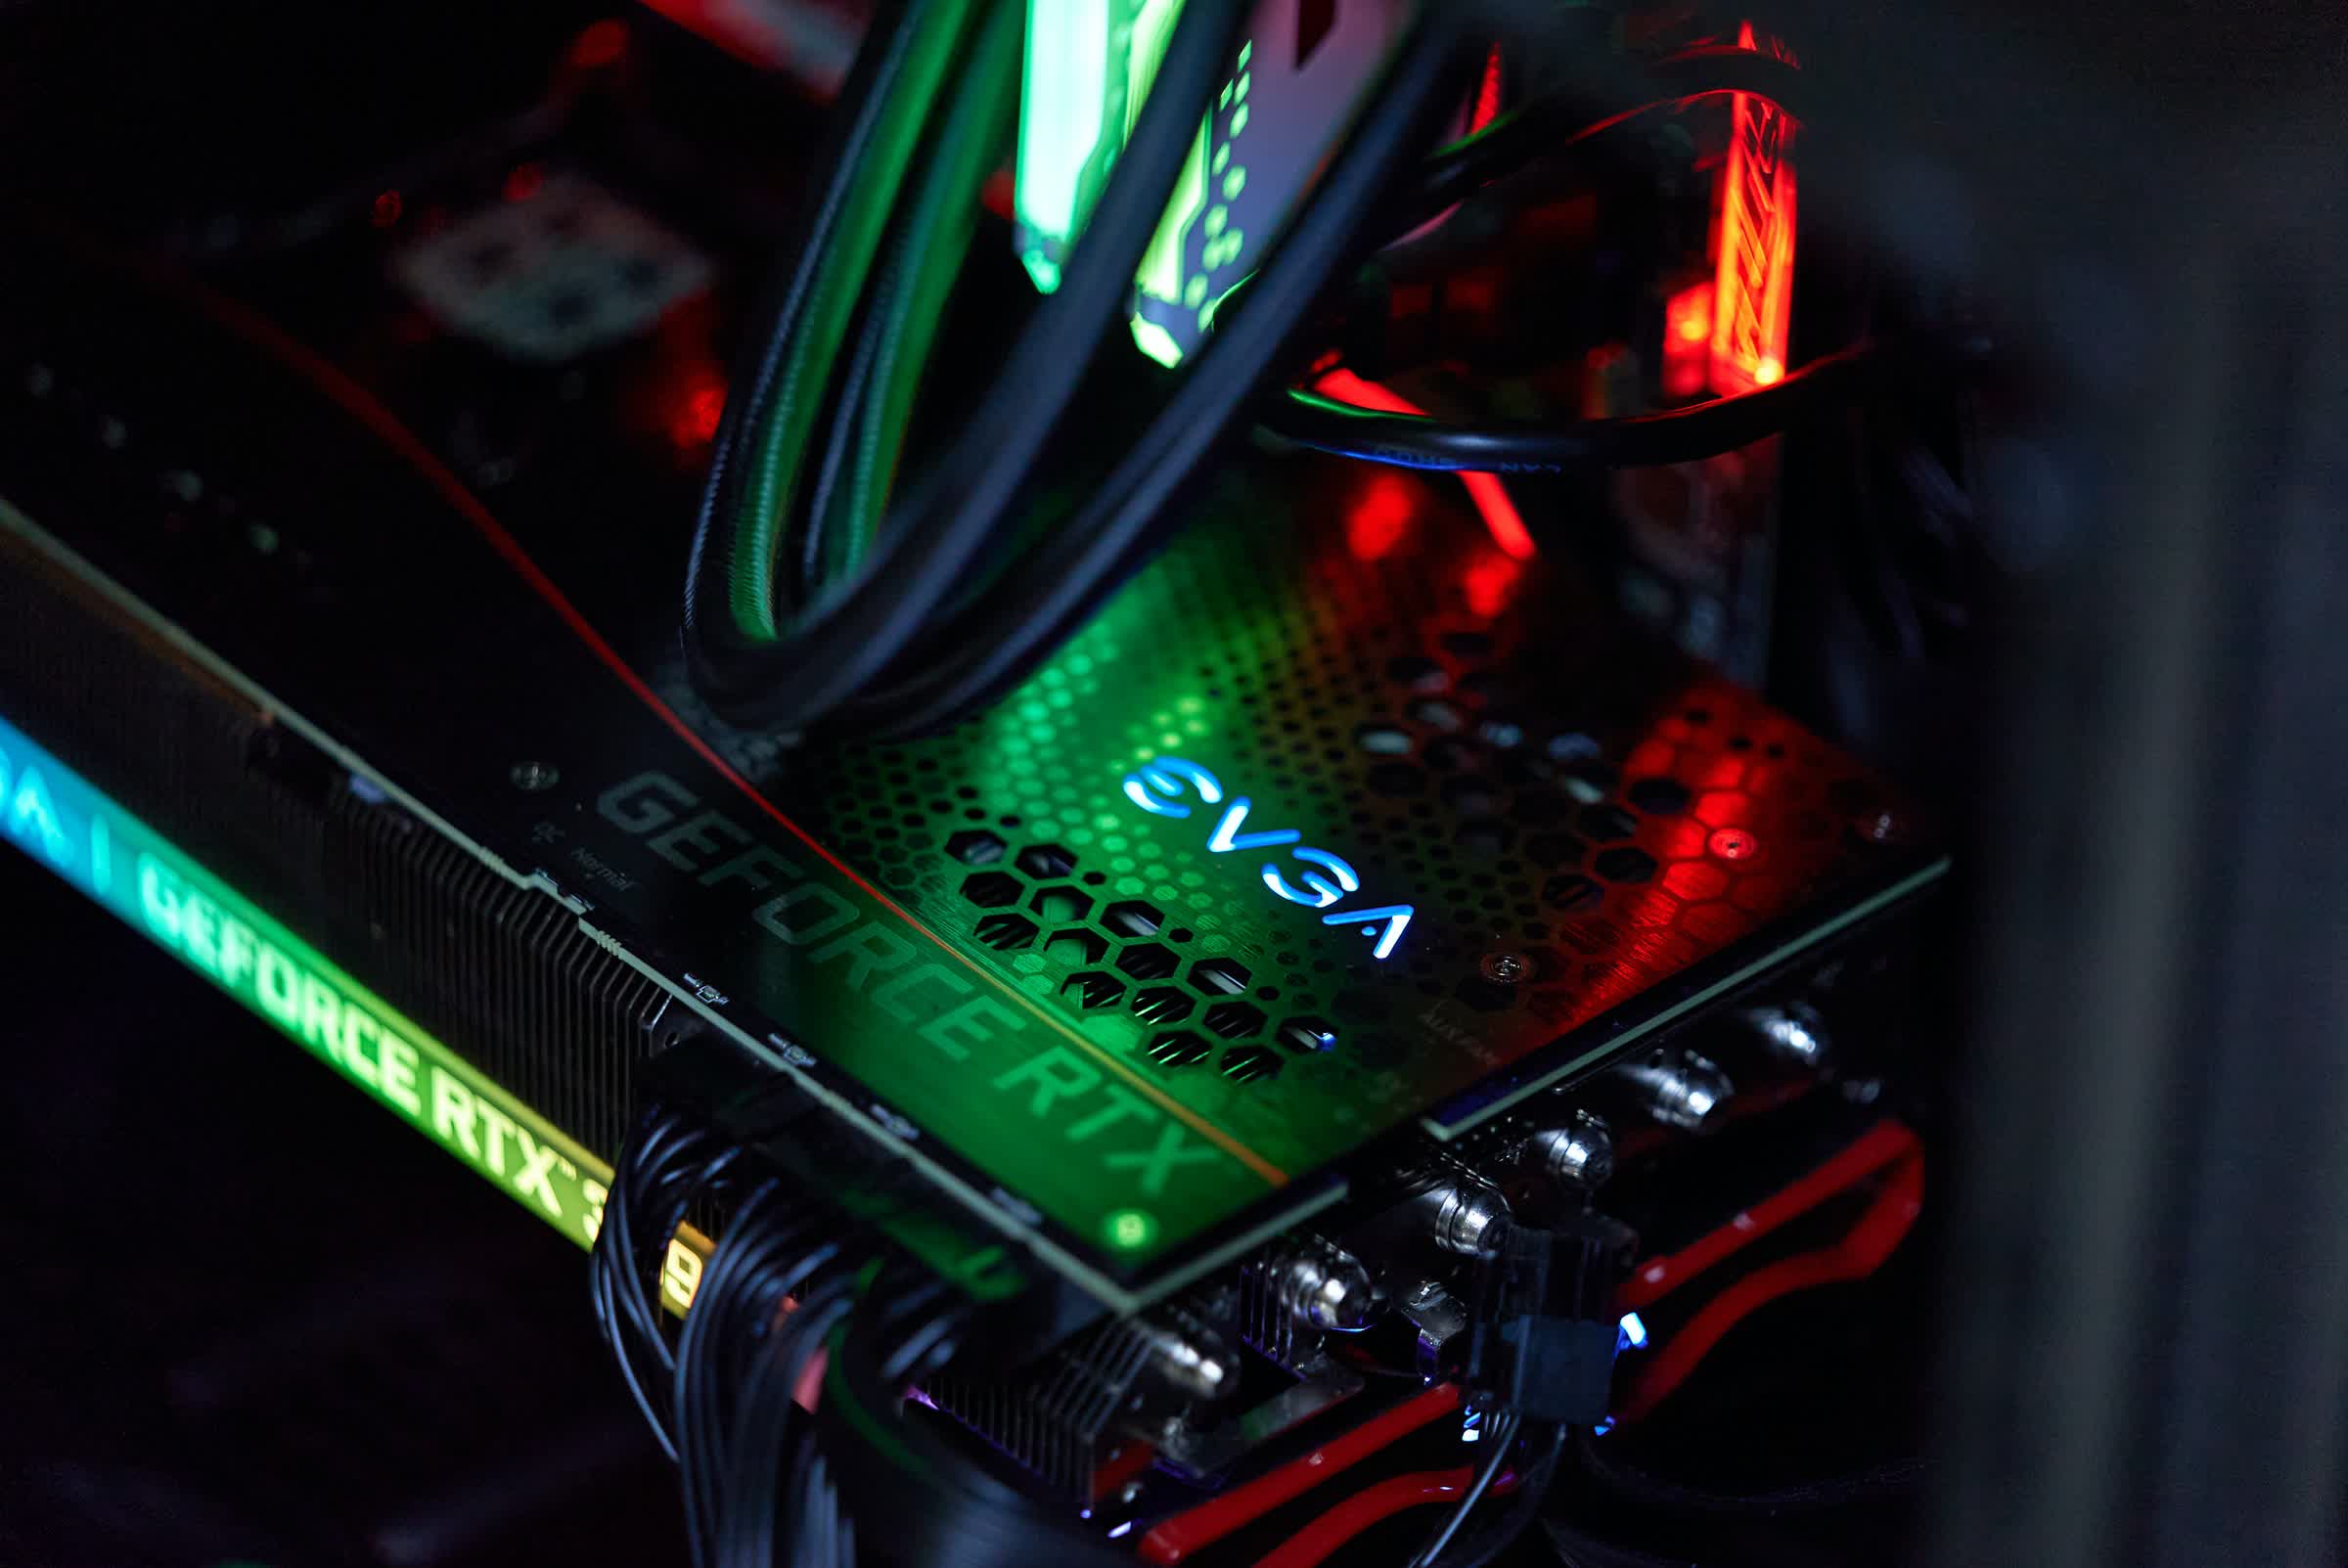 Nvidia's upcoming RTX 4090 graphics card could be two times faster than an RTX 3090